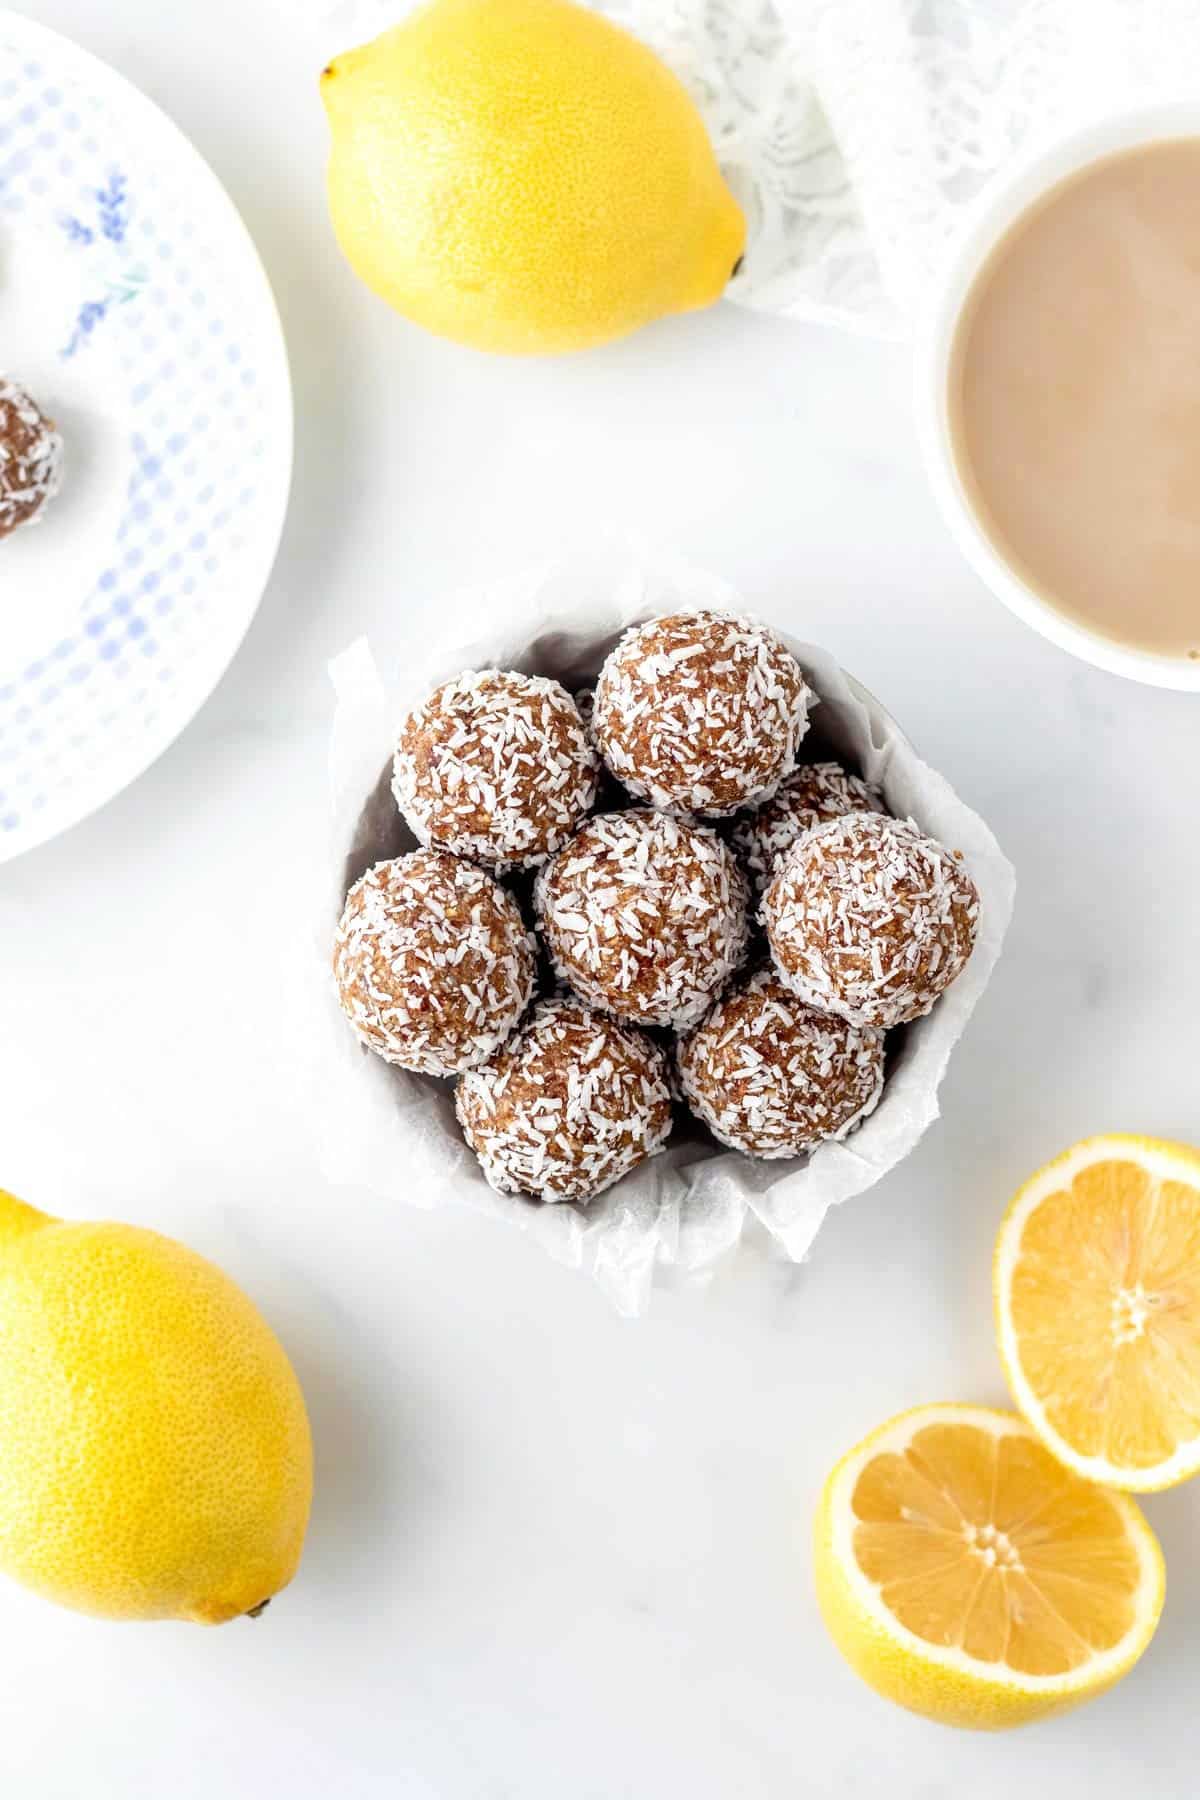 An overhead image of lemon balls in a small white bowl next to lemons.